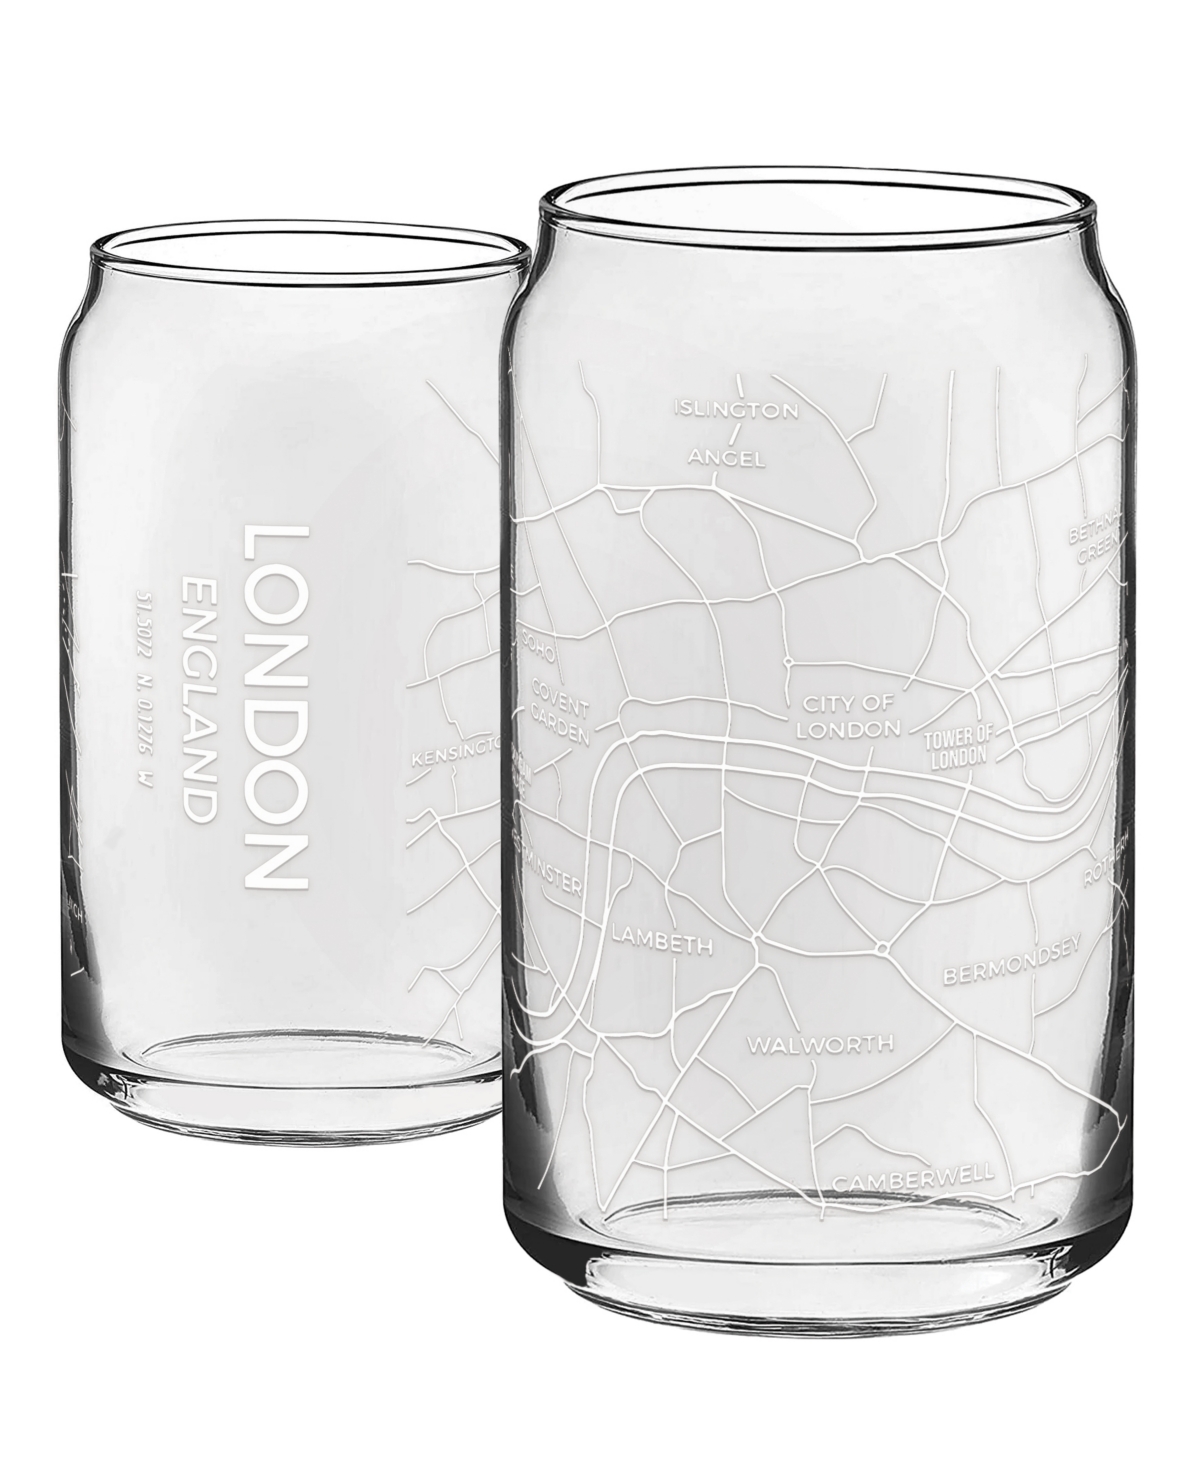 Narbo The Can London Map 16 oz Everyday Glassware, Set Of 2 In White